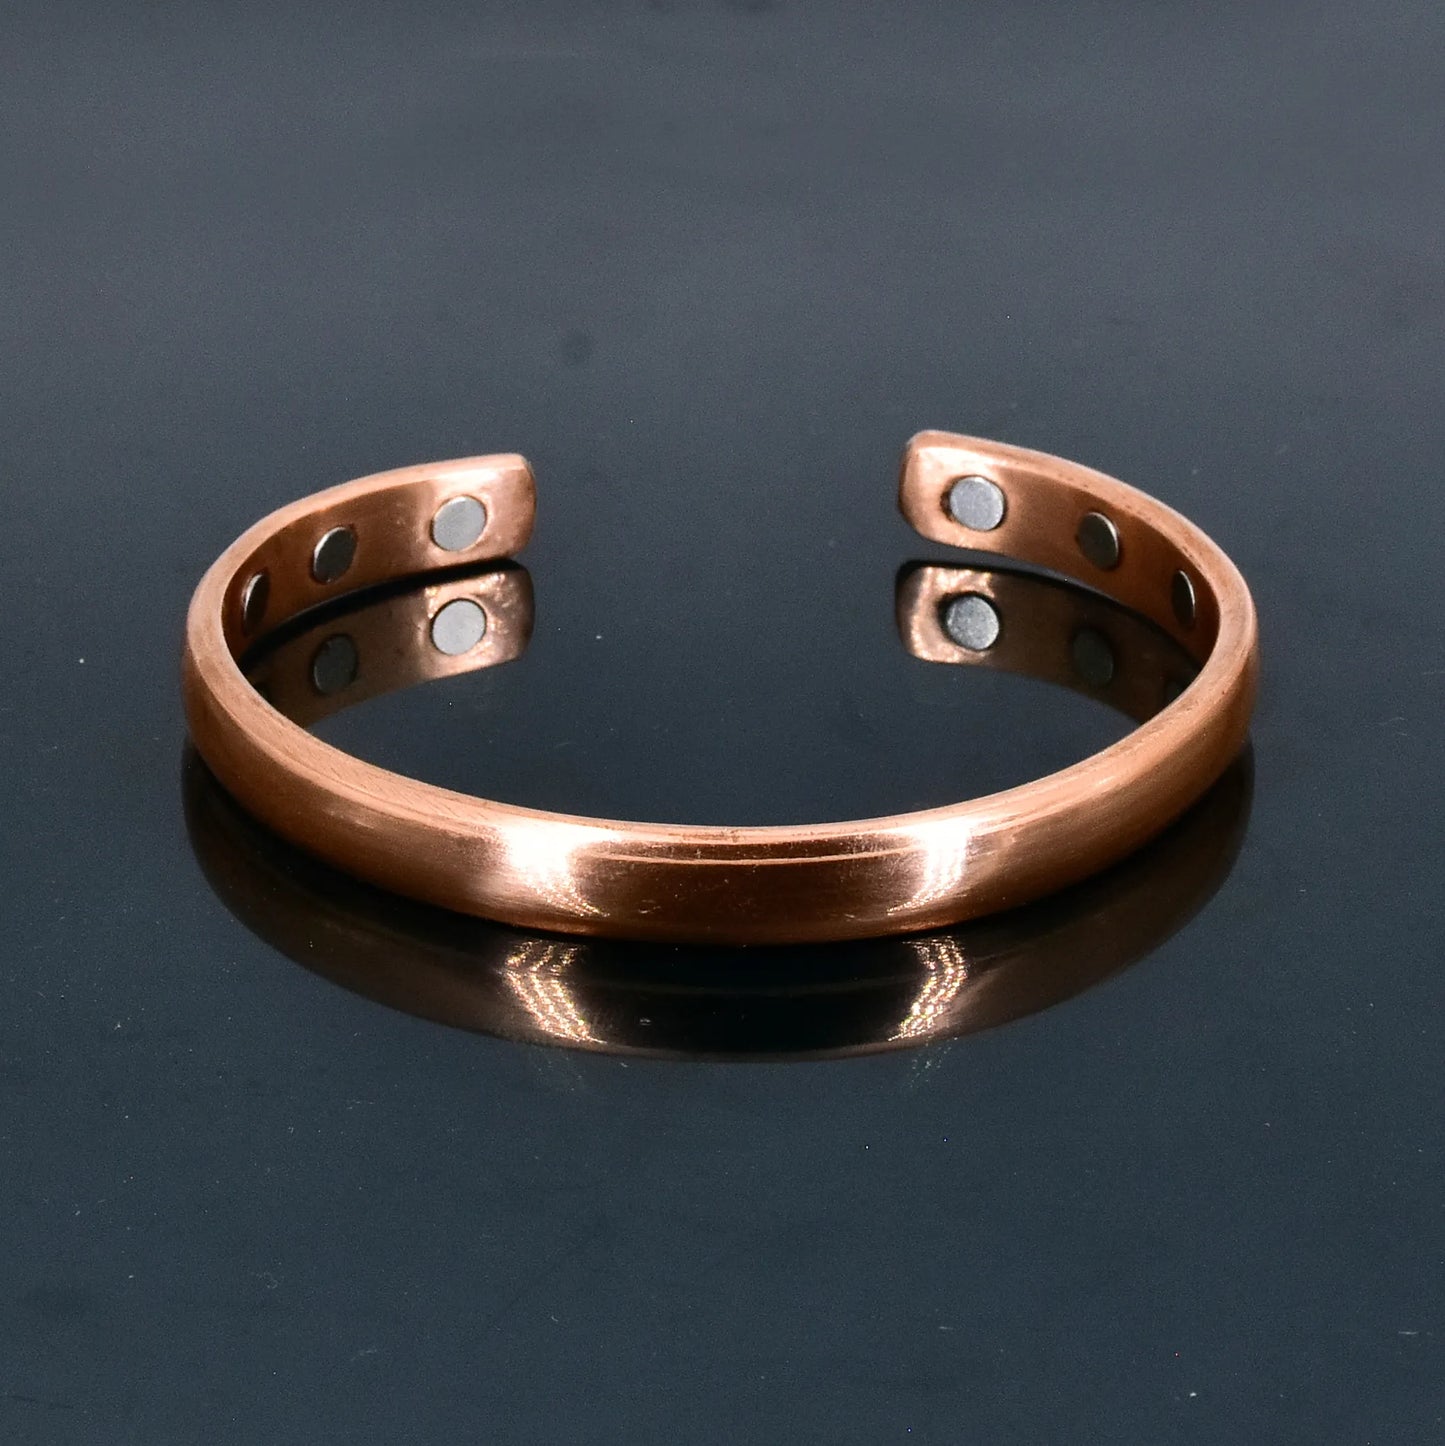 Magnetic Copper Kada Plain Design  a harmonious blend of elegance, tradition, and the potential health benefits of magnetic copper. Crafted with care, this kada seamlessly combines simplicity with sophistication.